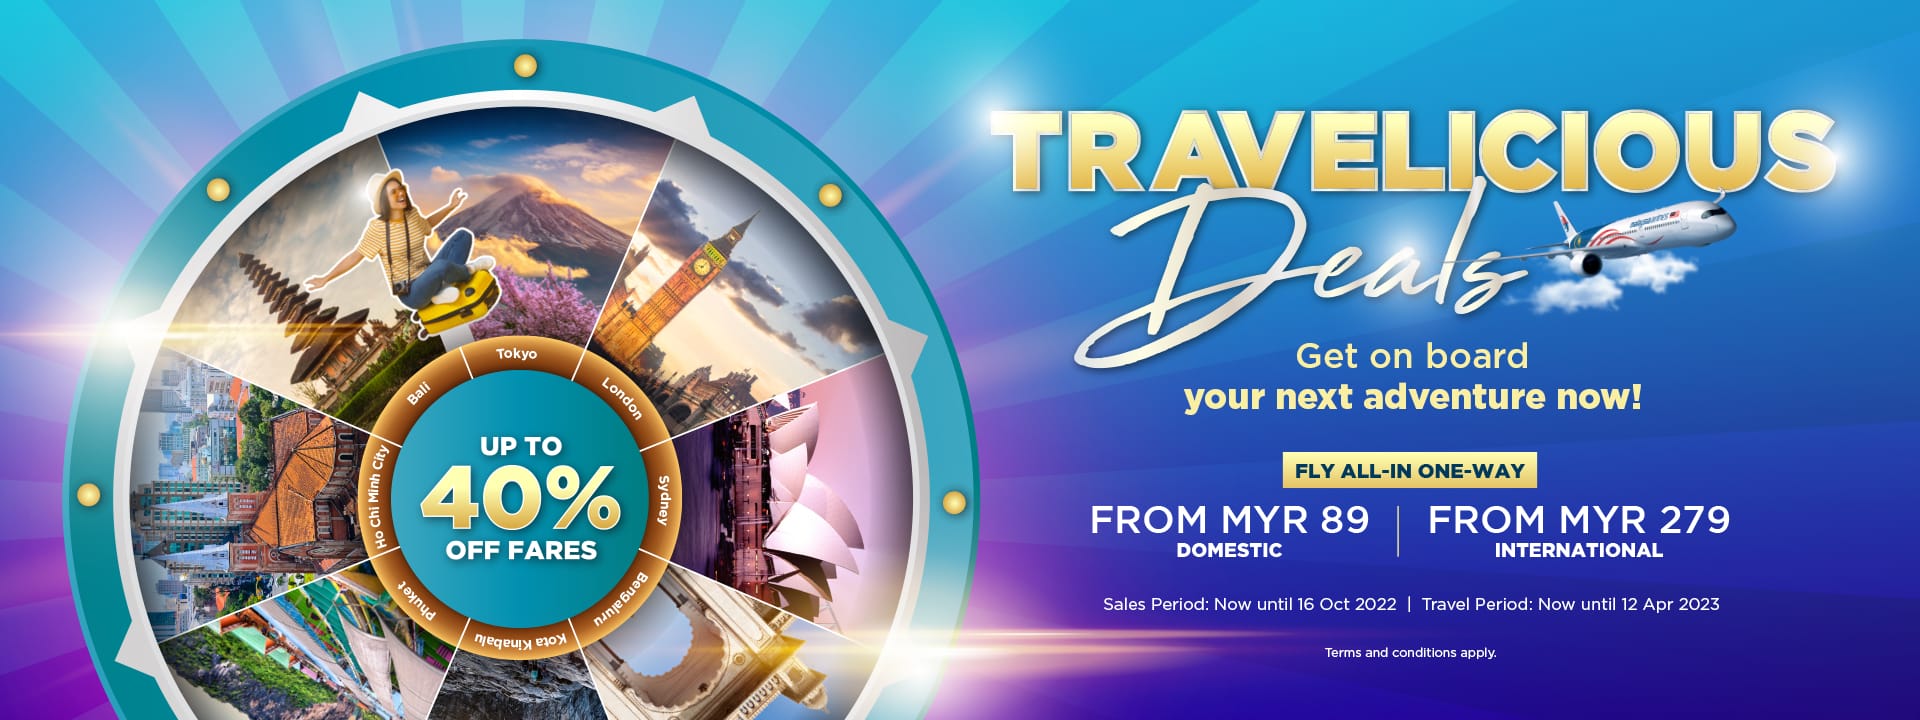 Malaysia Airlines Travelicious Deals - Domestic MH travelicious flight deals banner